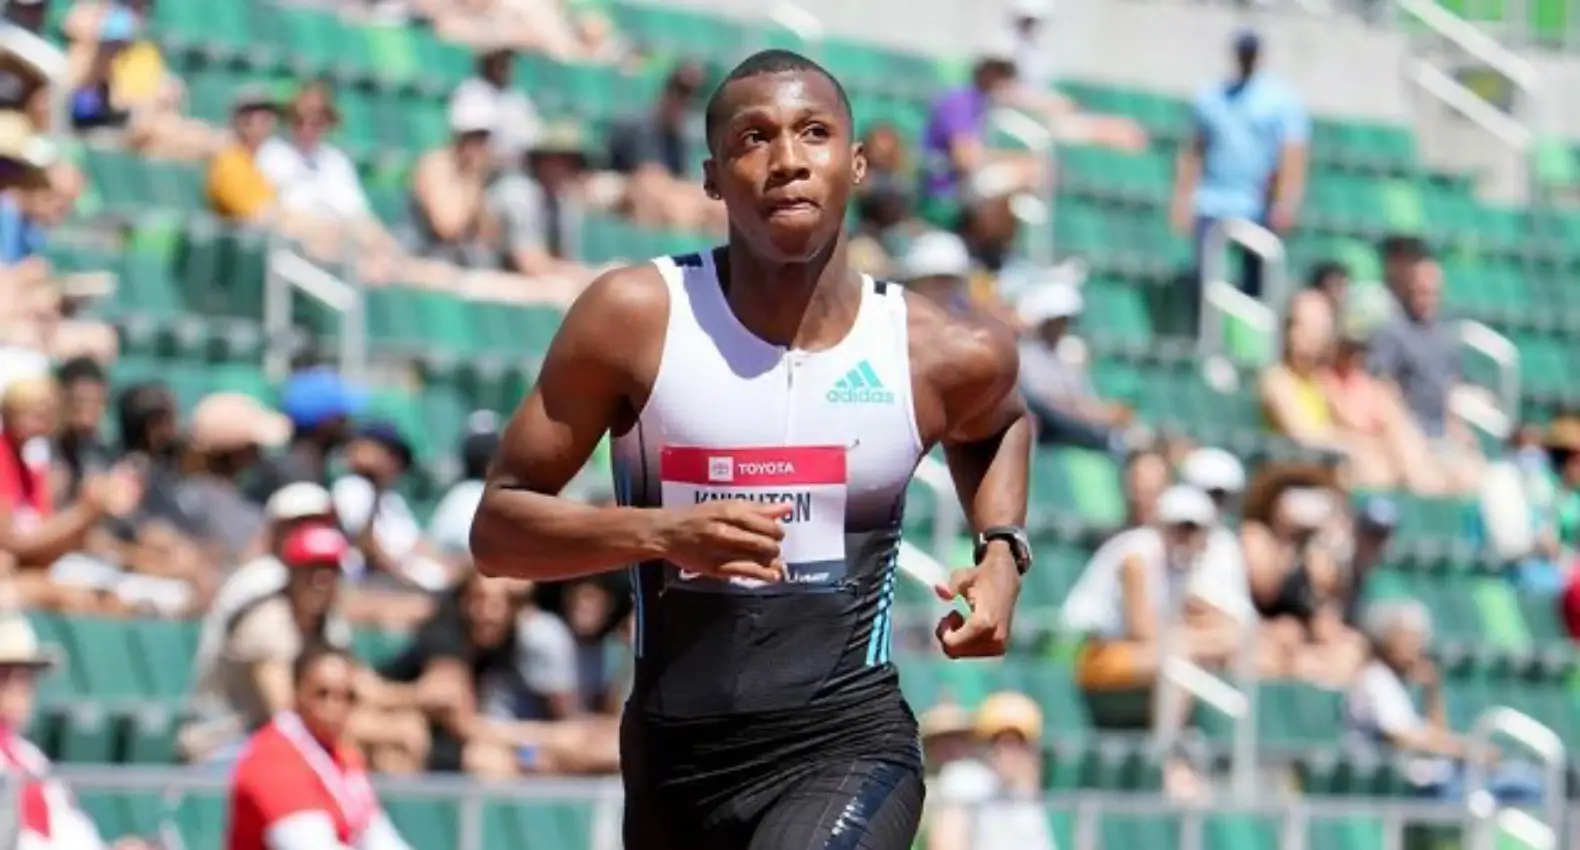 Erriyon Knighton in action over 200m at the USATF Outdoor Championships 2022